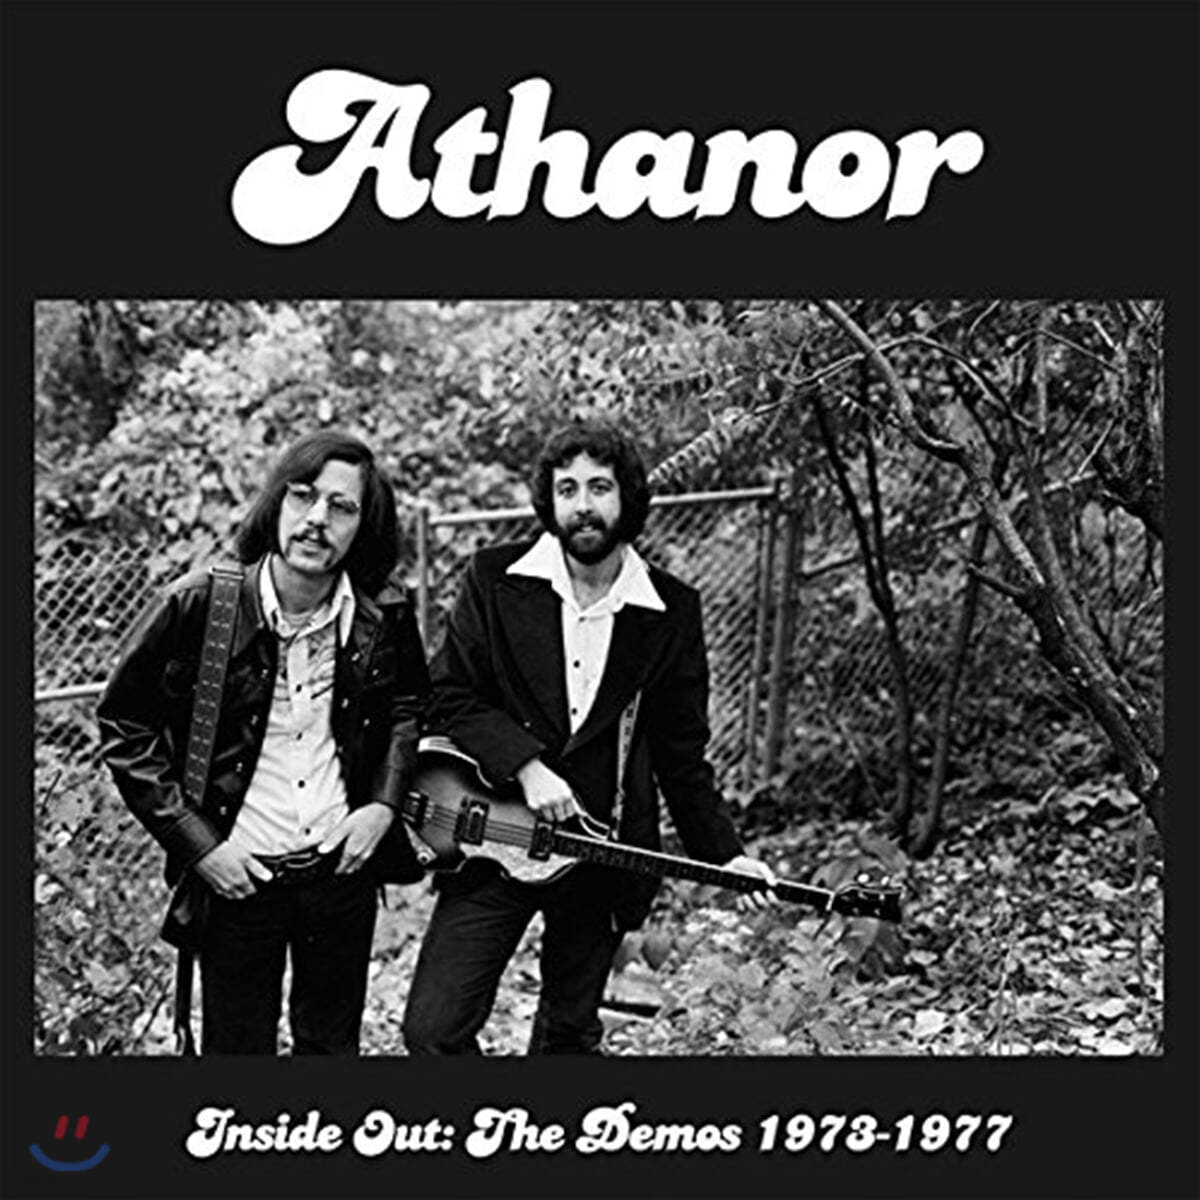 Athanor (아타노르) - Inside Out: The Demos 1973-1977 [LP] 